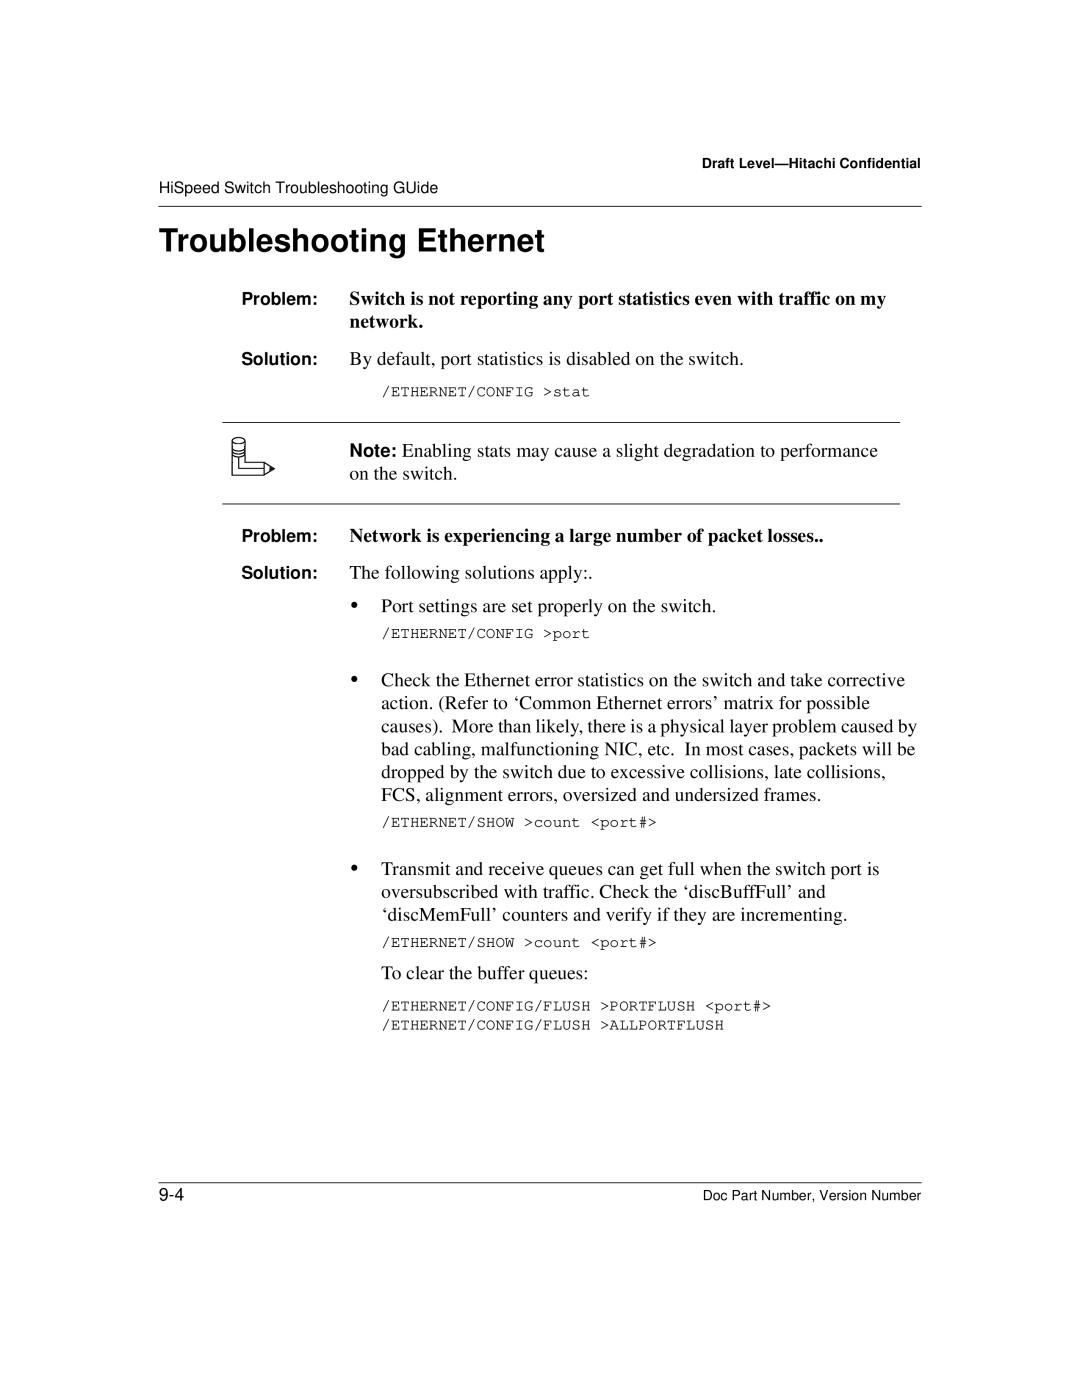 Hitachi US7070447-001 manual Troubleshooting Ethernet, Problem Network is experiencing a large number of packet losses 